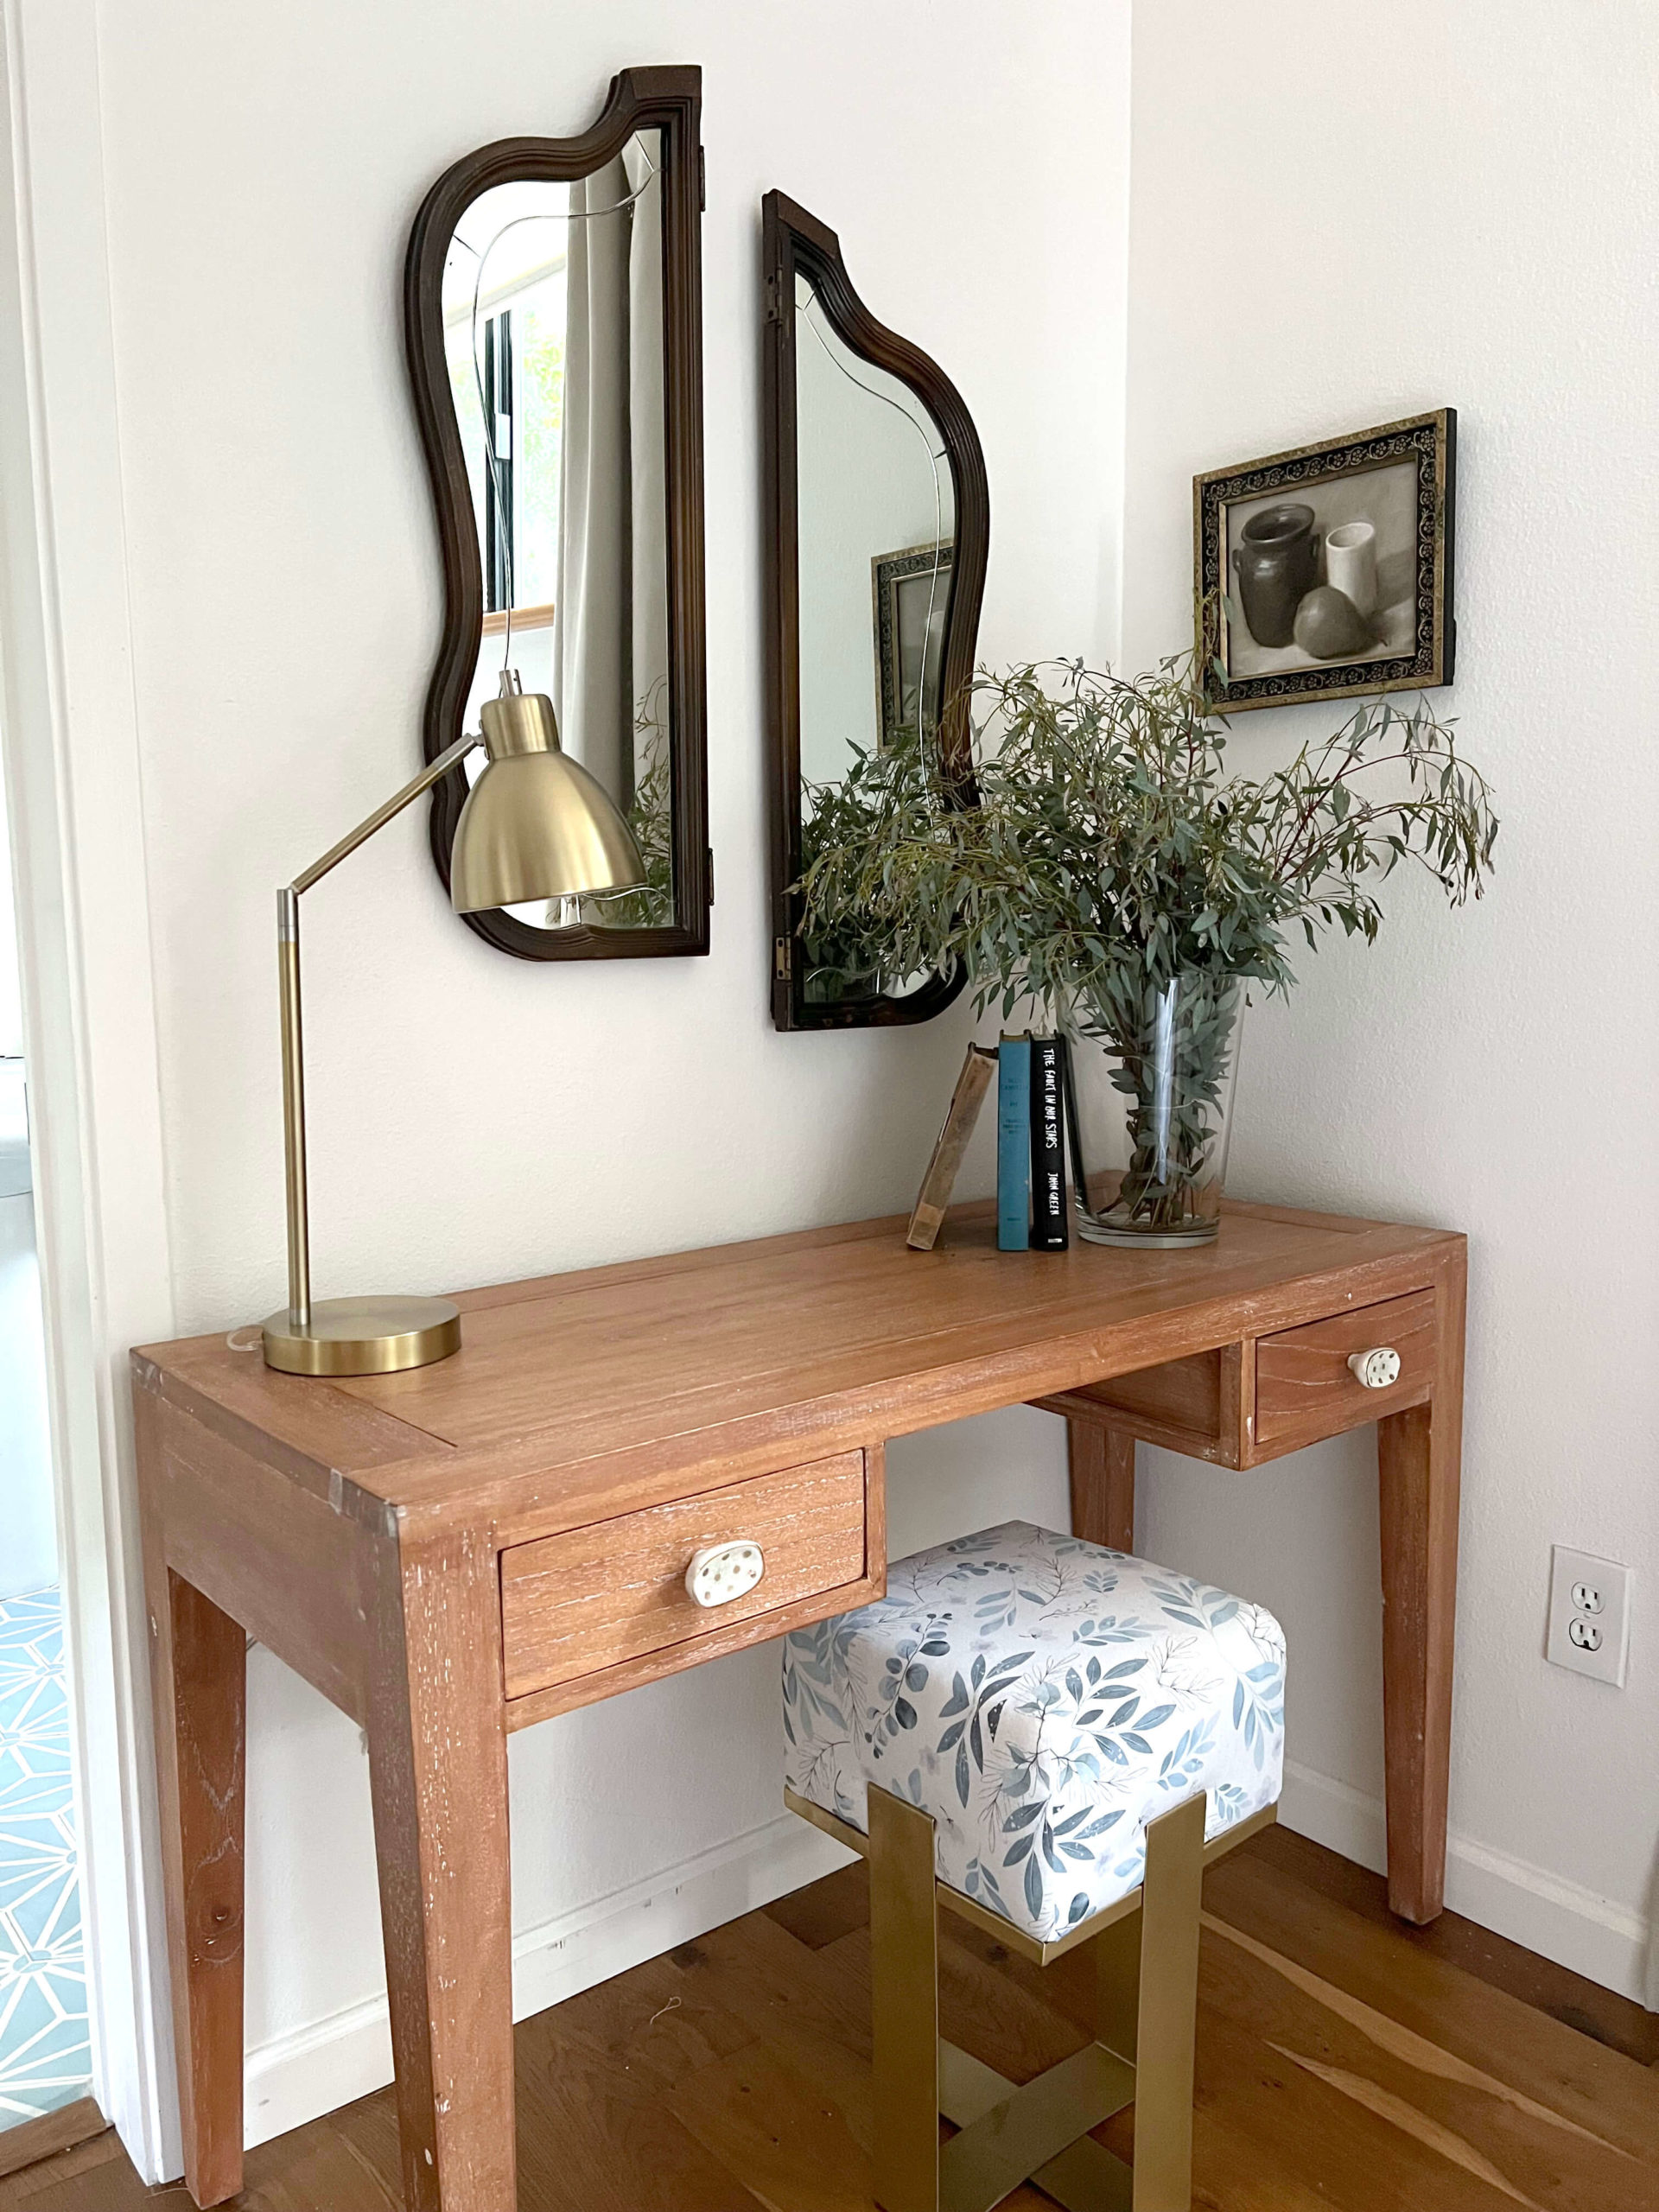 Vanity table with stool, lamp, books, green florals, and mirrors from Uncommon Objects in bedroom in Bouldin Creek Airbnb in South Austin, Texas